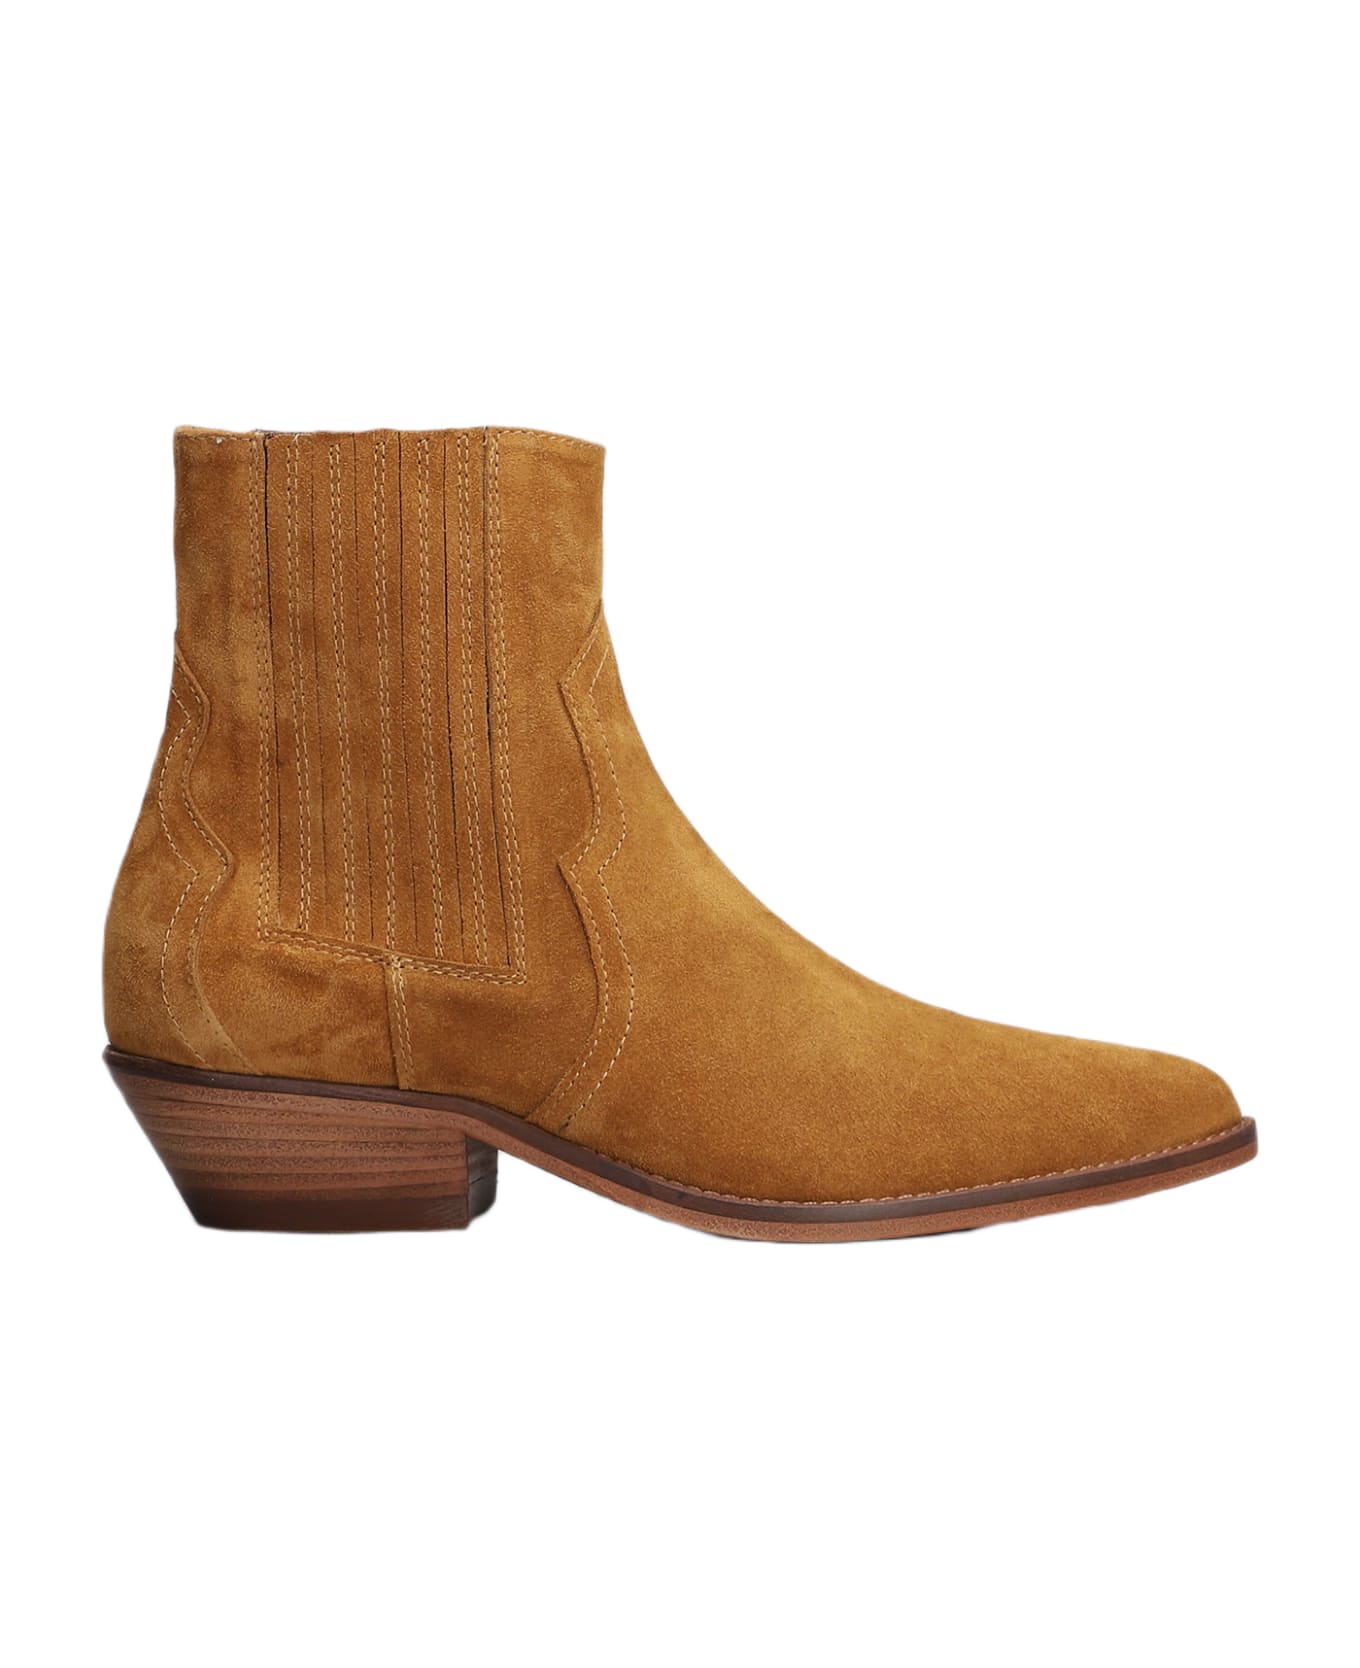 Julie Dee Texan Ankle Boots In Leather Color Suede - leather color